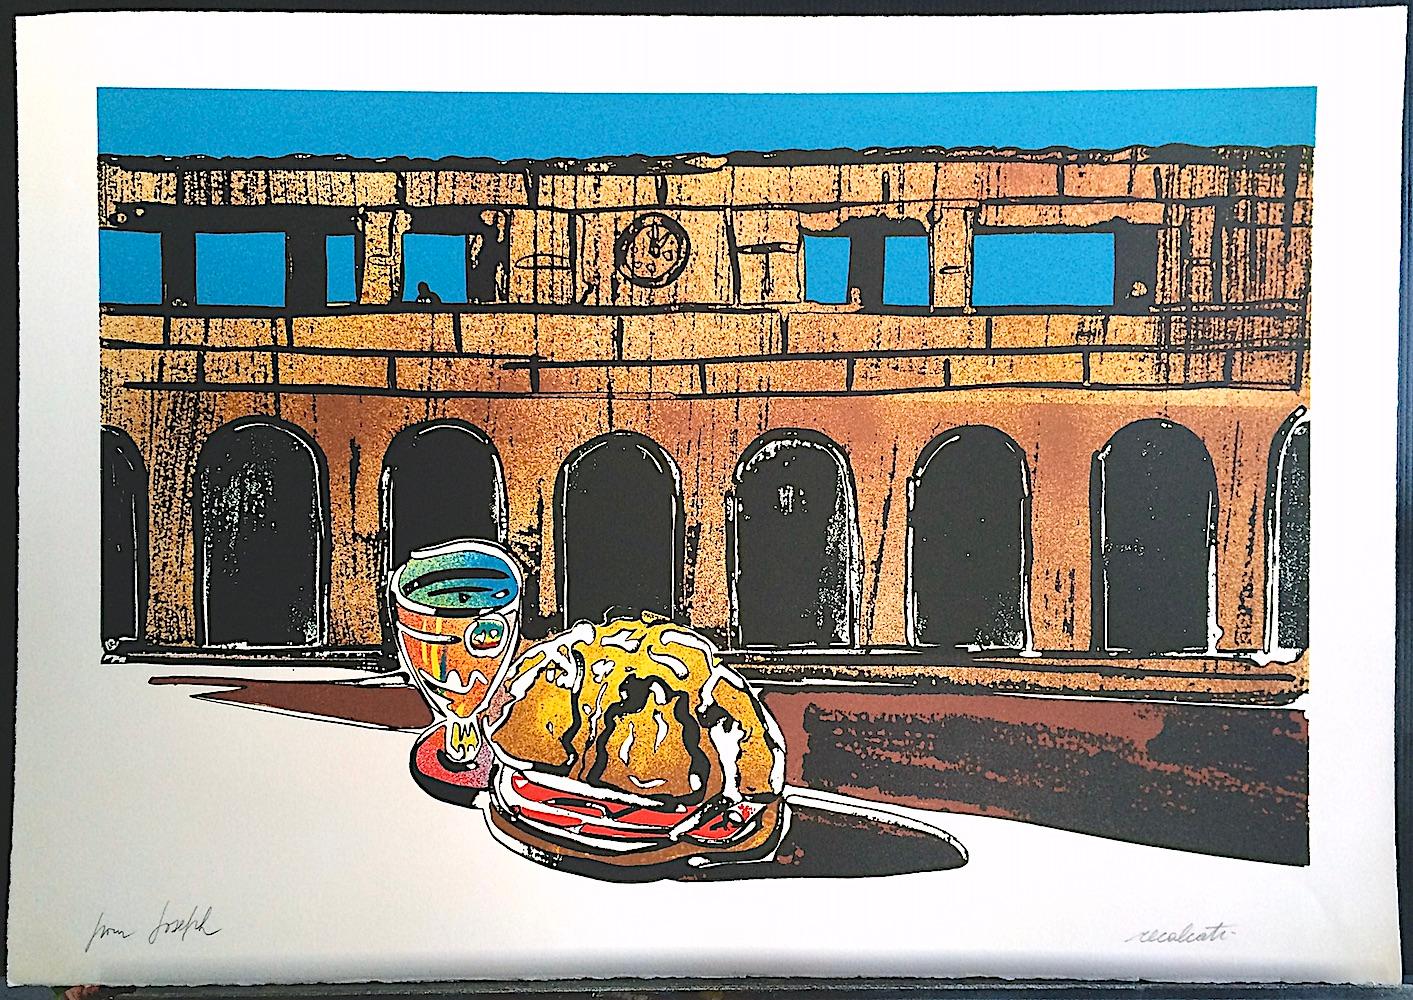 HOMAGE TO DE CHIRICO is an original, hand drawn, stone lithograph by the Italian artist Antonio Recalcati (1938-2022) printed in Paris France c. 1973 using hand lithography techniques on archival printmaking paper, 100% acid free. HOMAGE TO DE